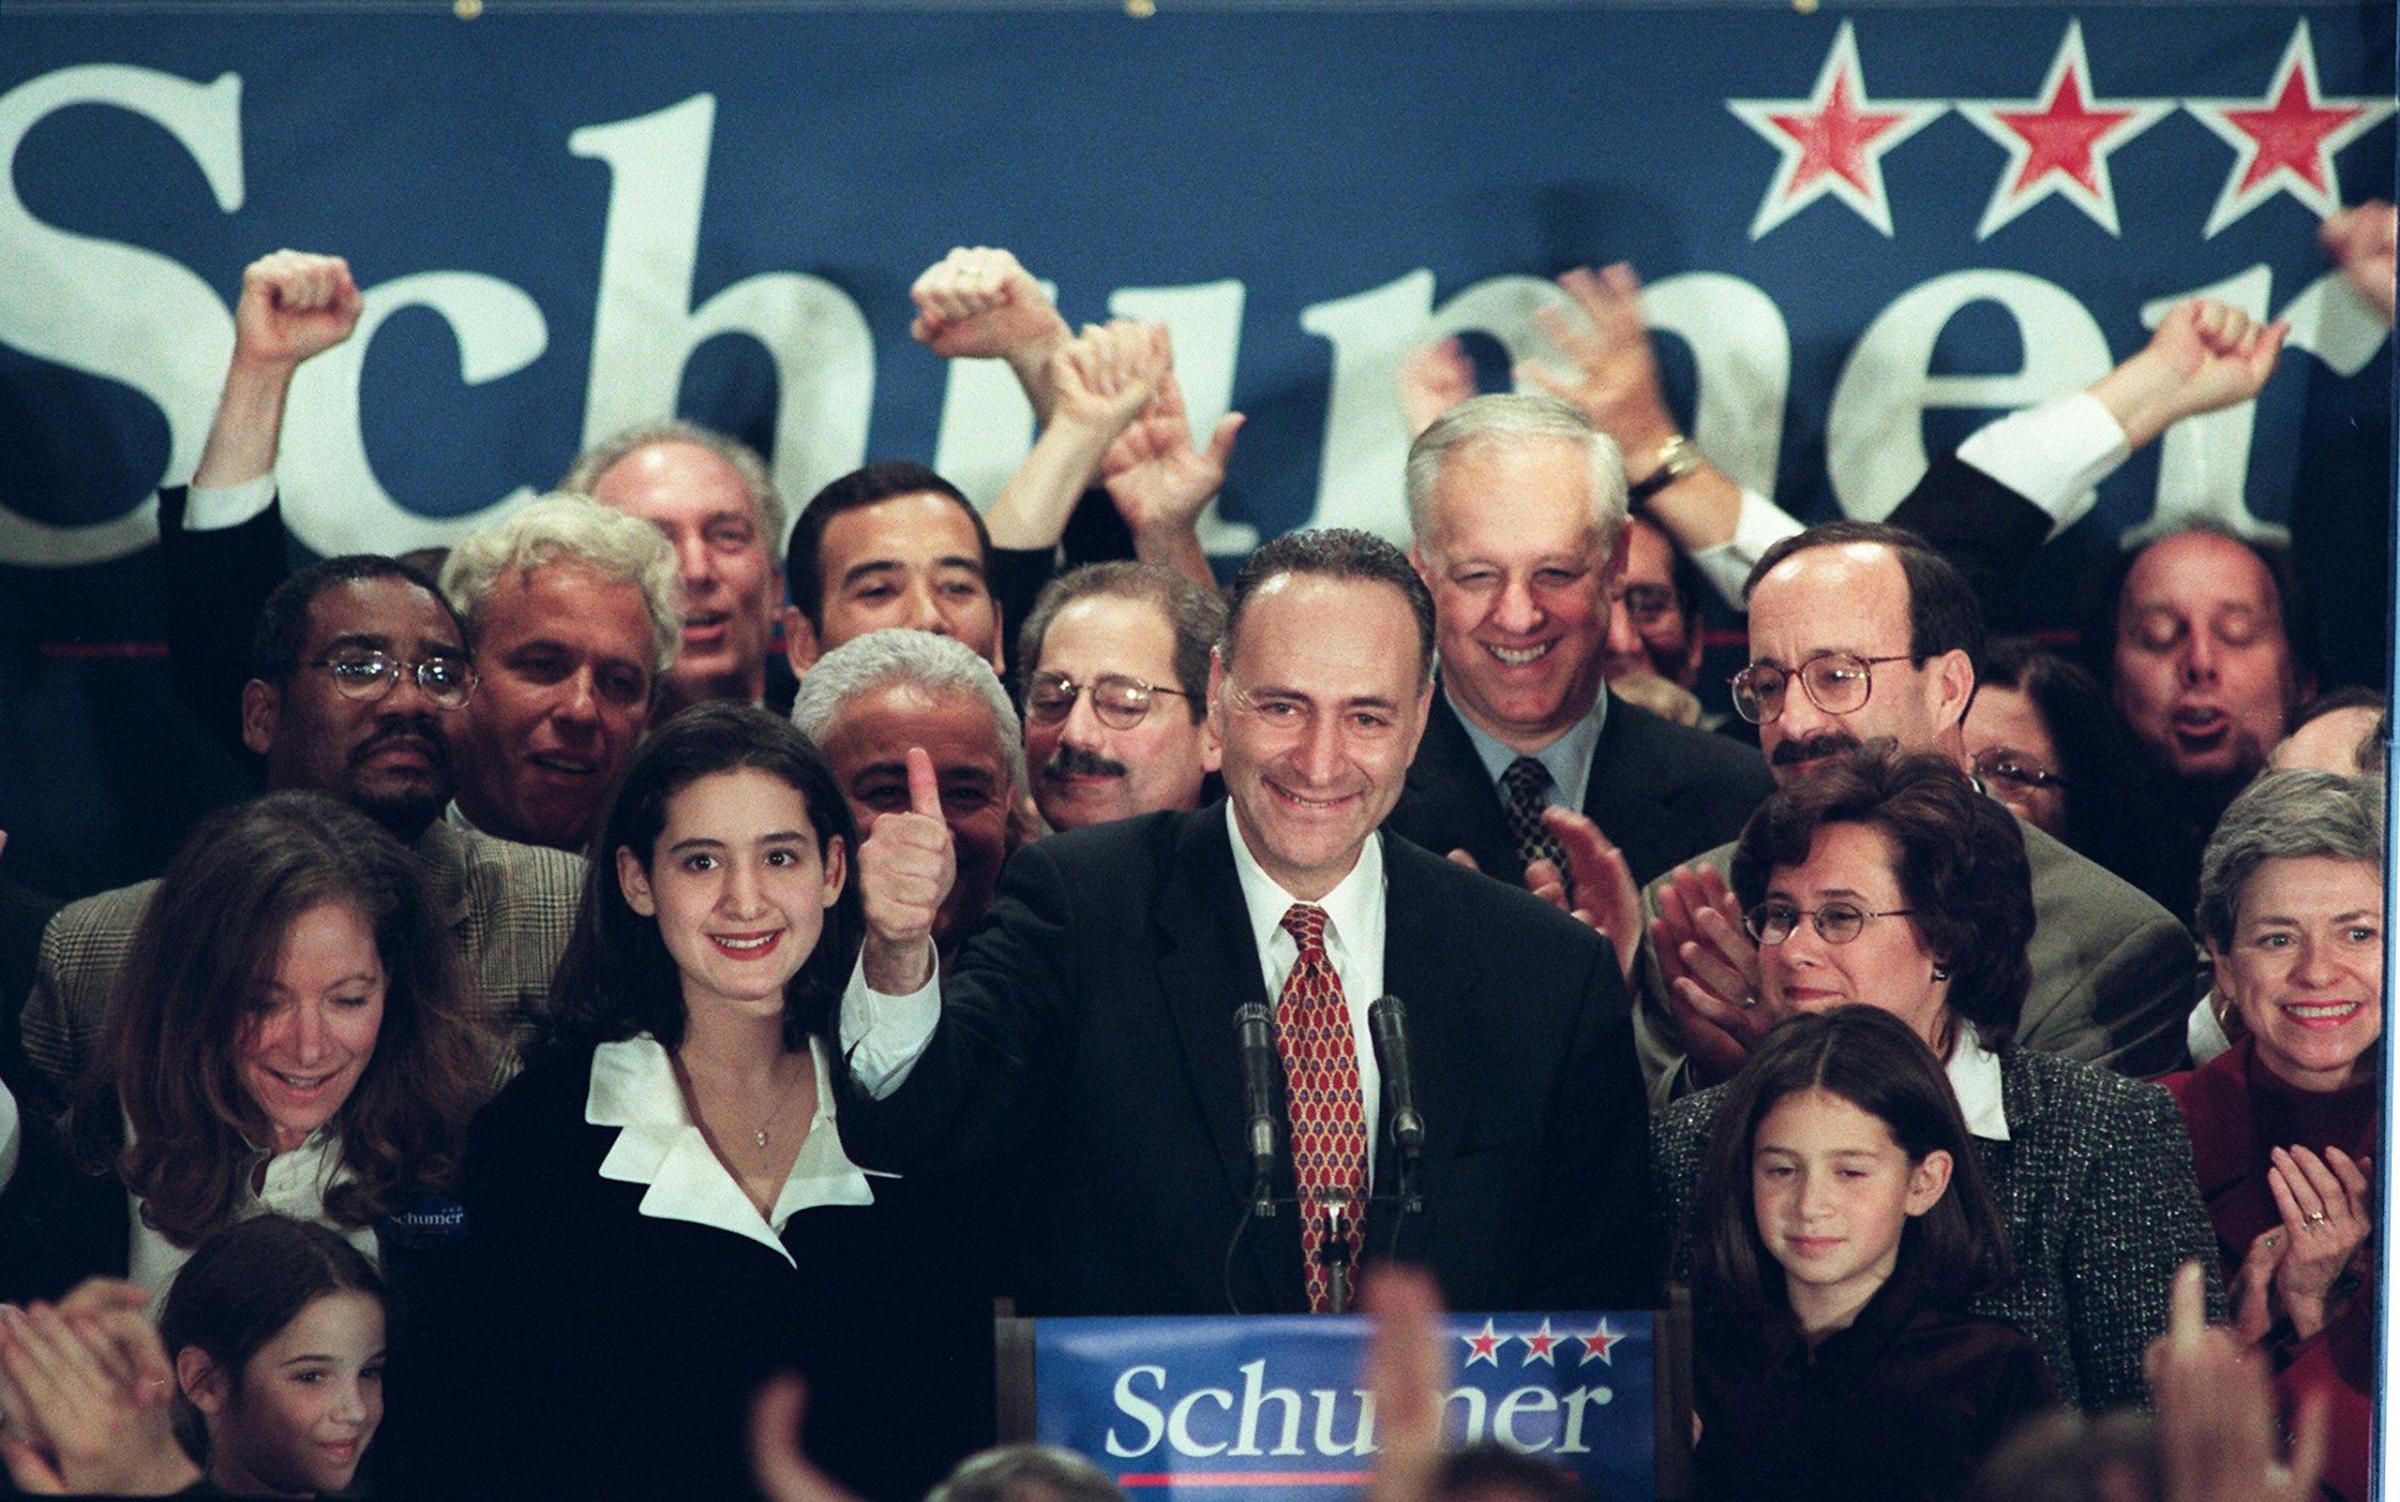 Senator-elect Charles Schumer (C) is surrounded by his wife Iris (2nd from R) and daughters Jessica (L) and Alison (R) after he defeated incumbent Republican Senator Alphonse D'Amato in the New York senatorial race in New York, Nov.3, 1998.